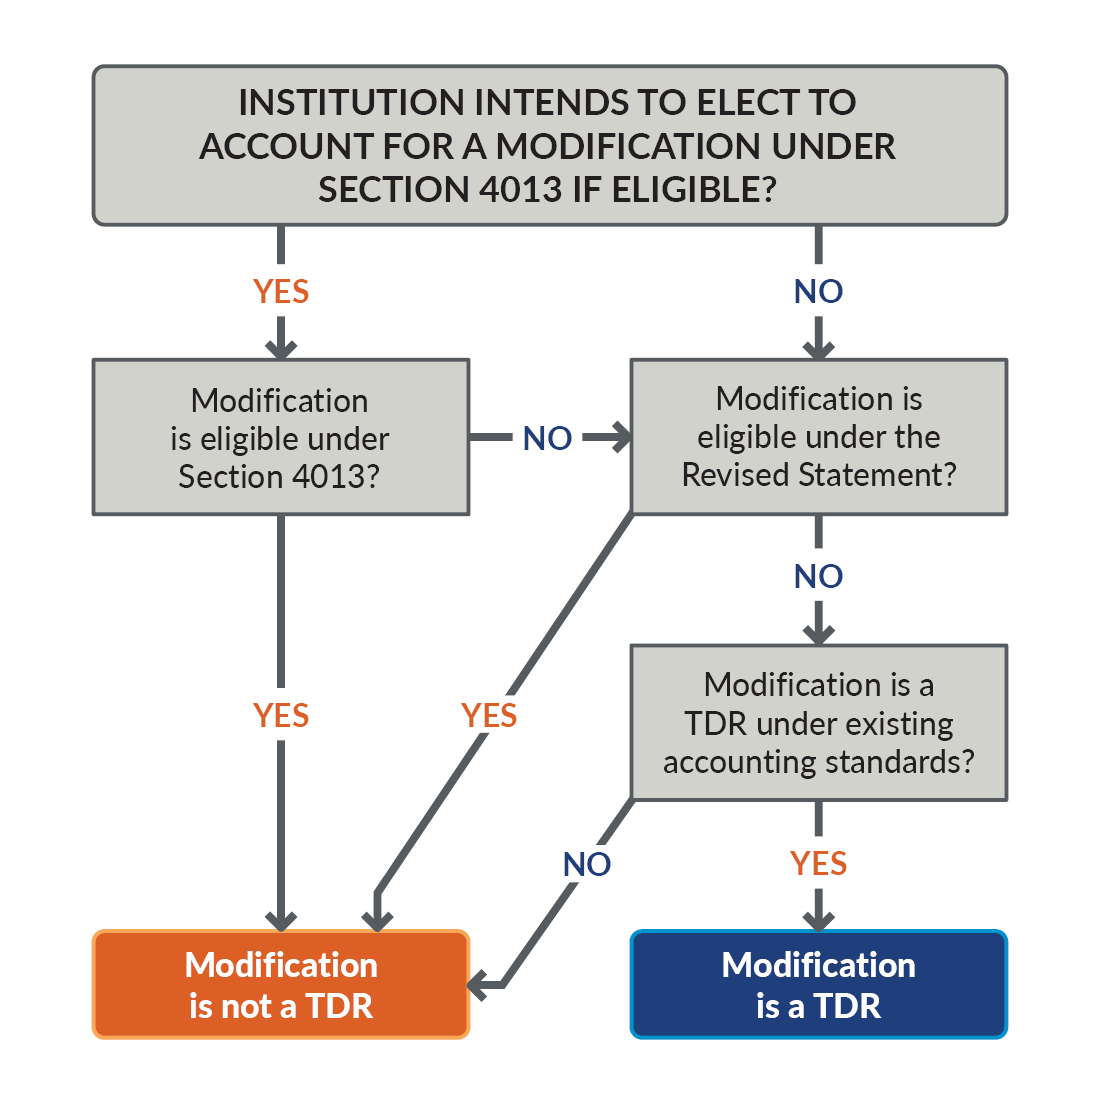 Flow chart depicting COVID-19 loan modifications and accounting considerations.